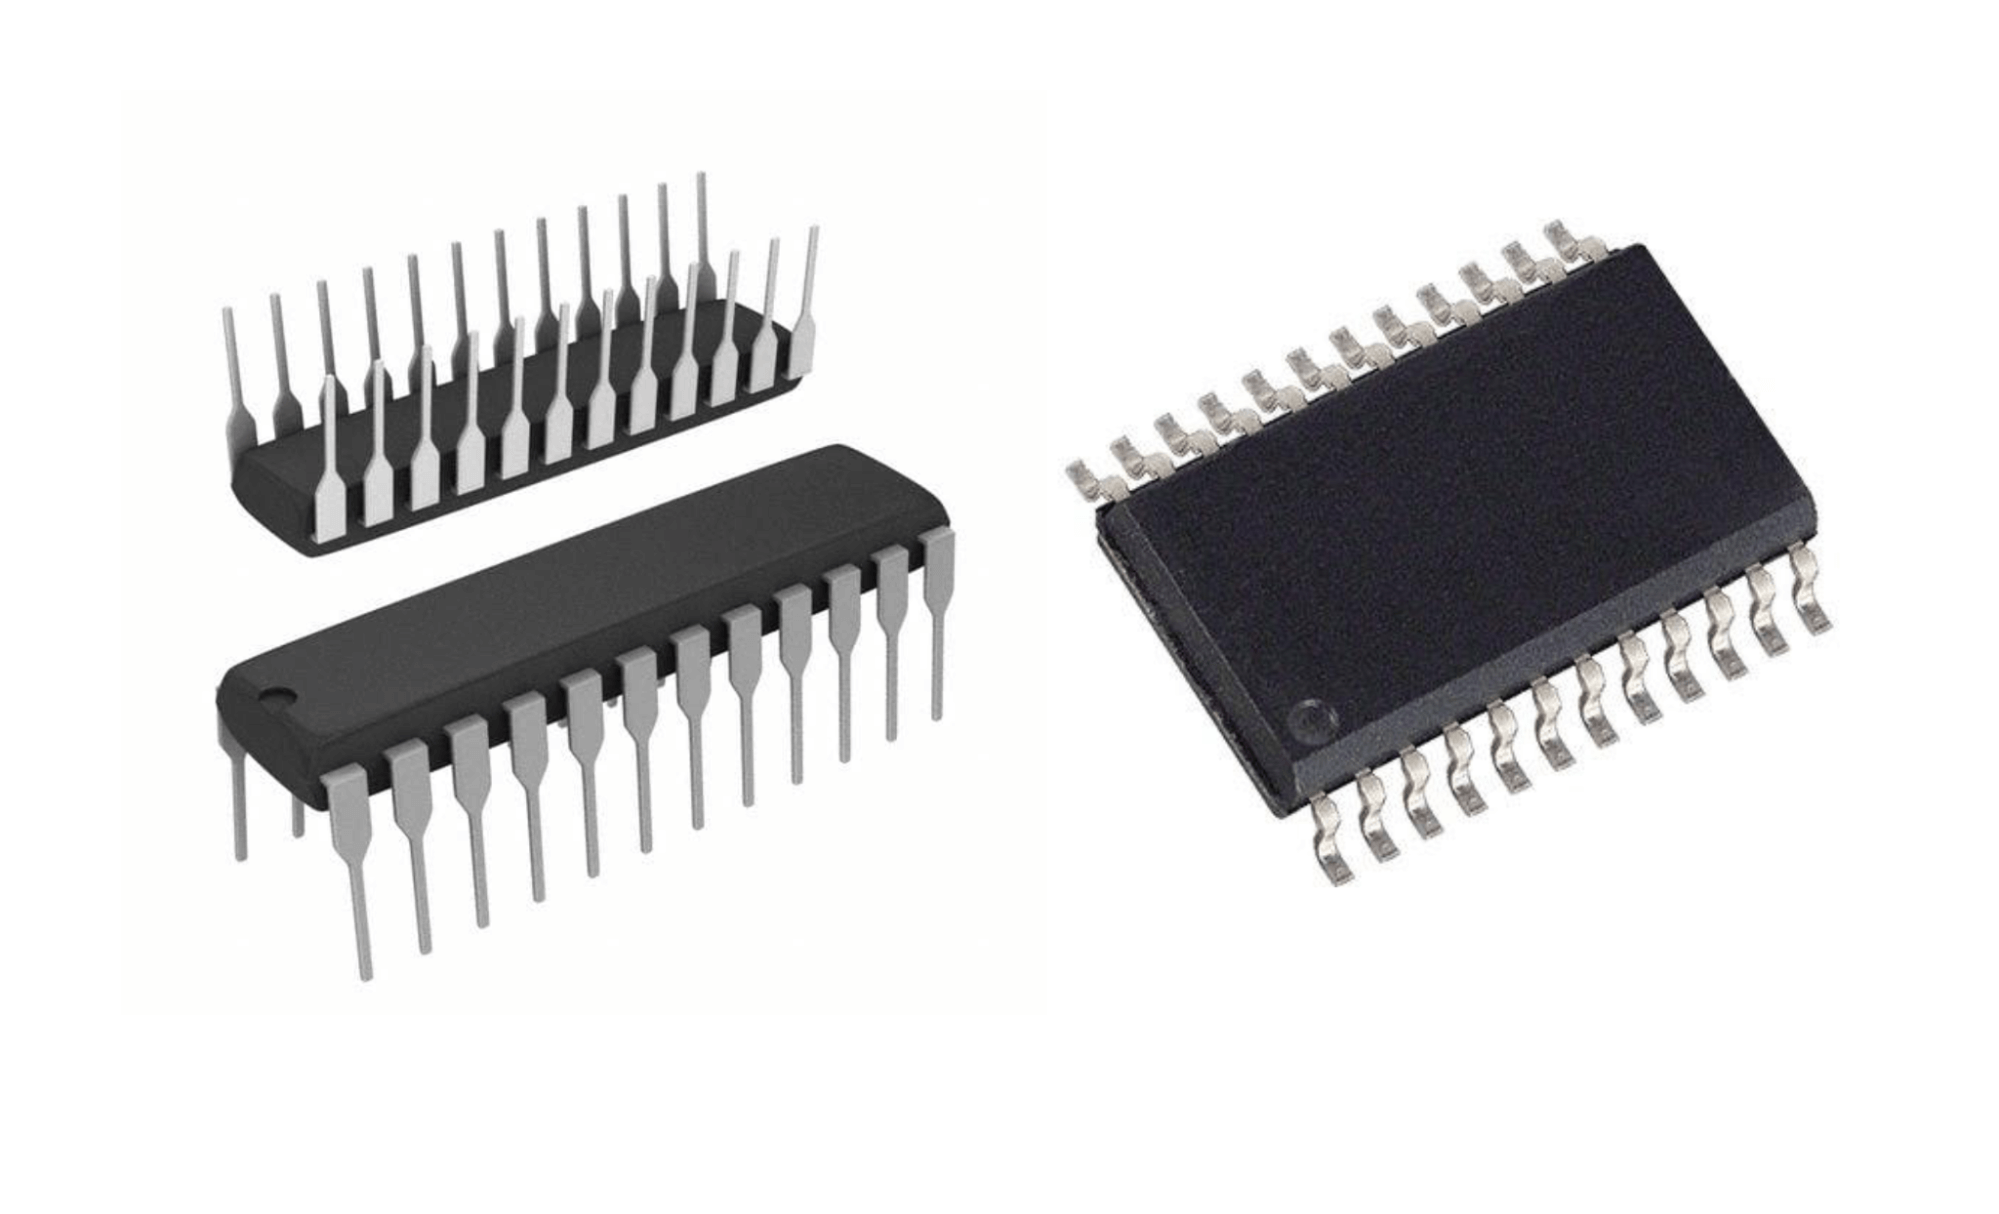 DIP (Dual In-line Package) and SOIC (Small Outline Integrated Circuit)